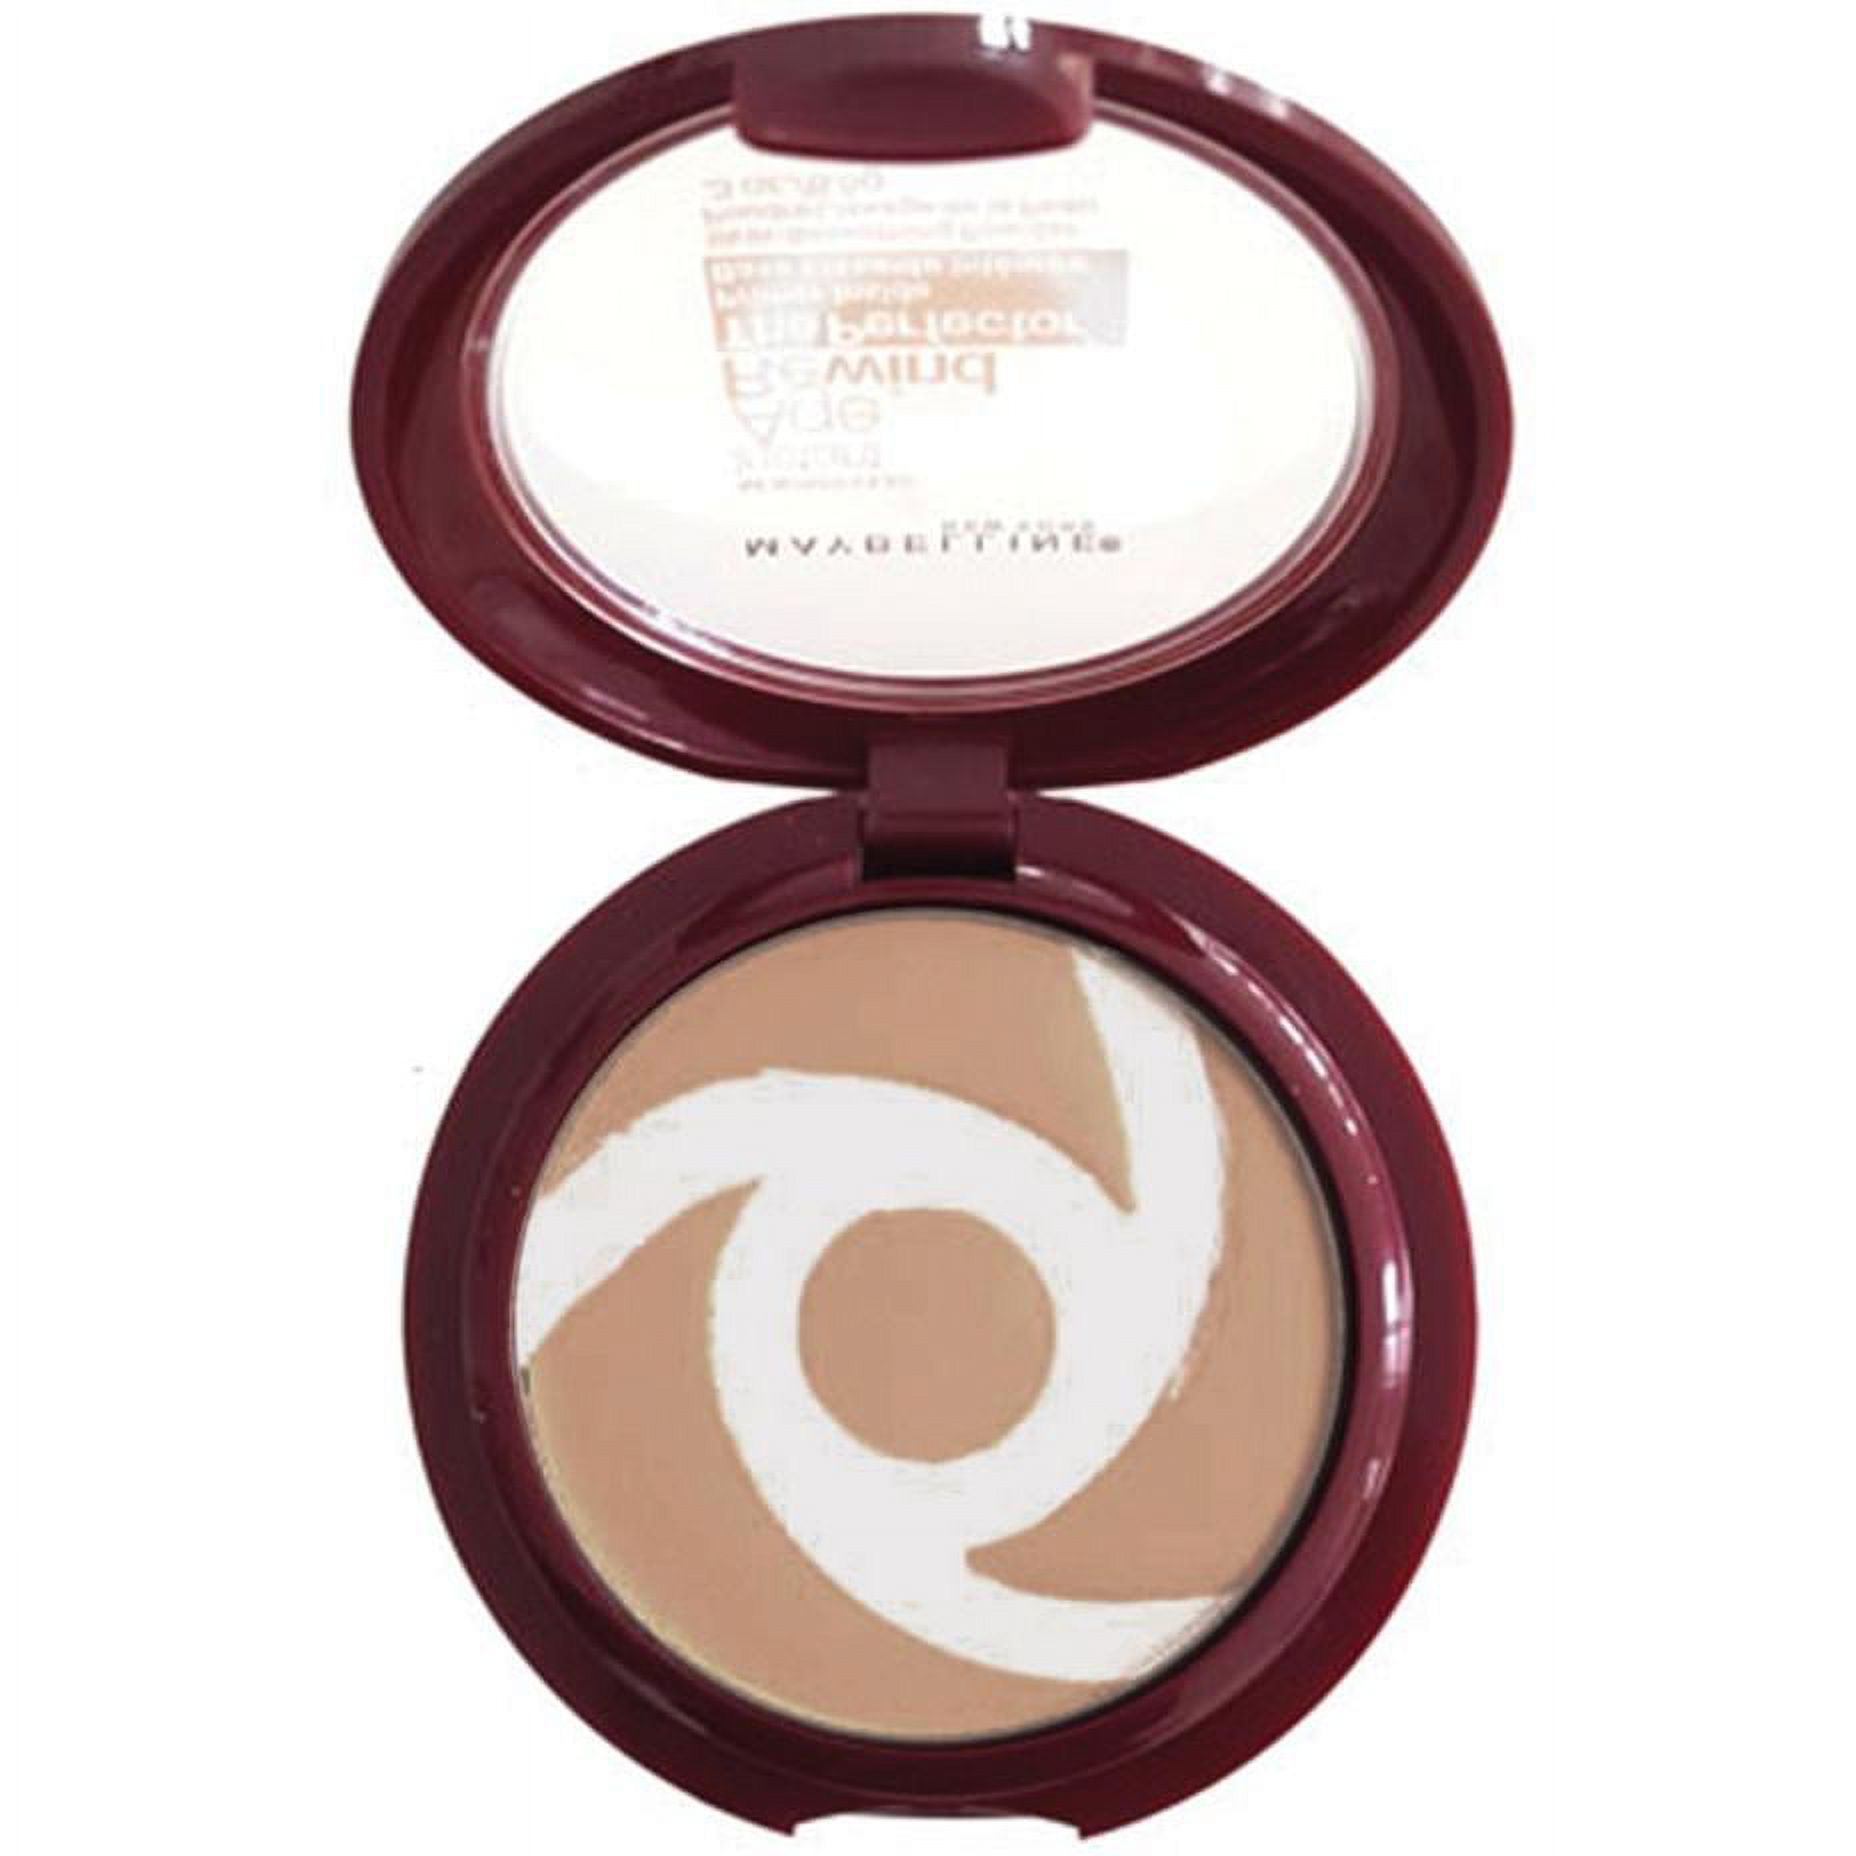 Maybelline Instant Age Rewind The Perfector Primer Powder, Light - image 5 of 7